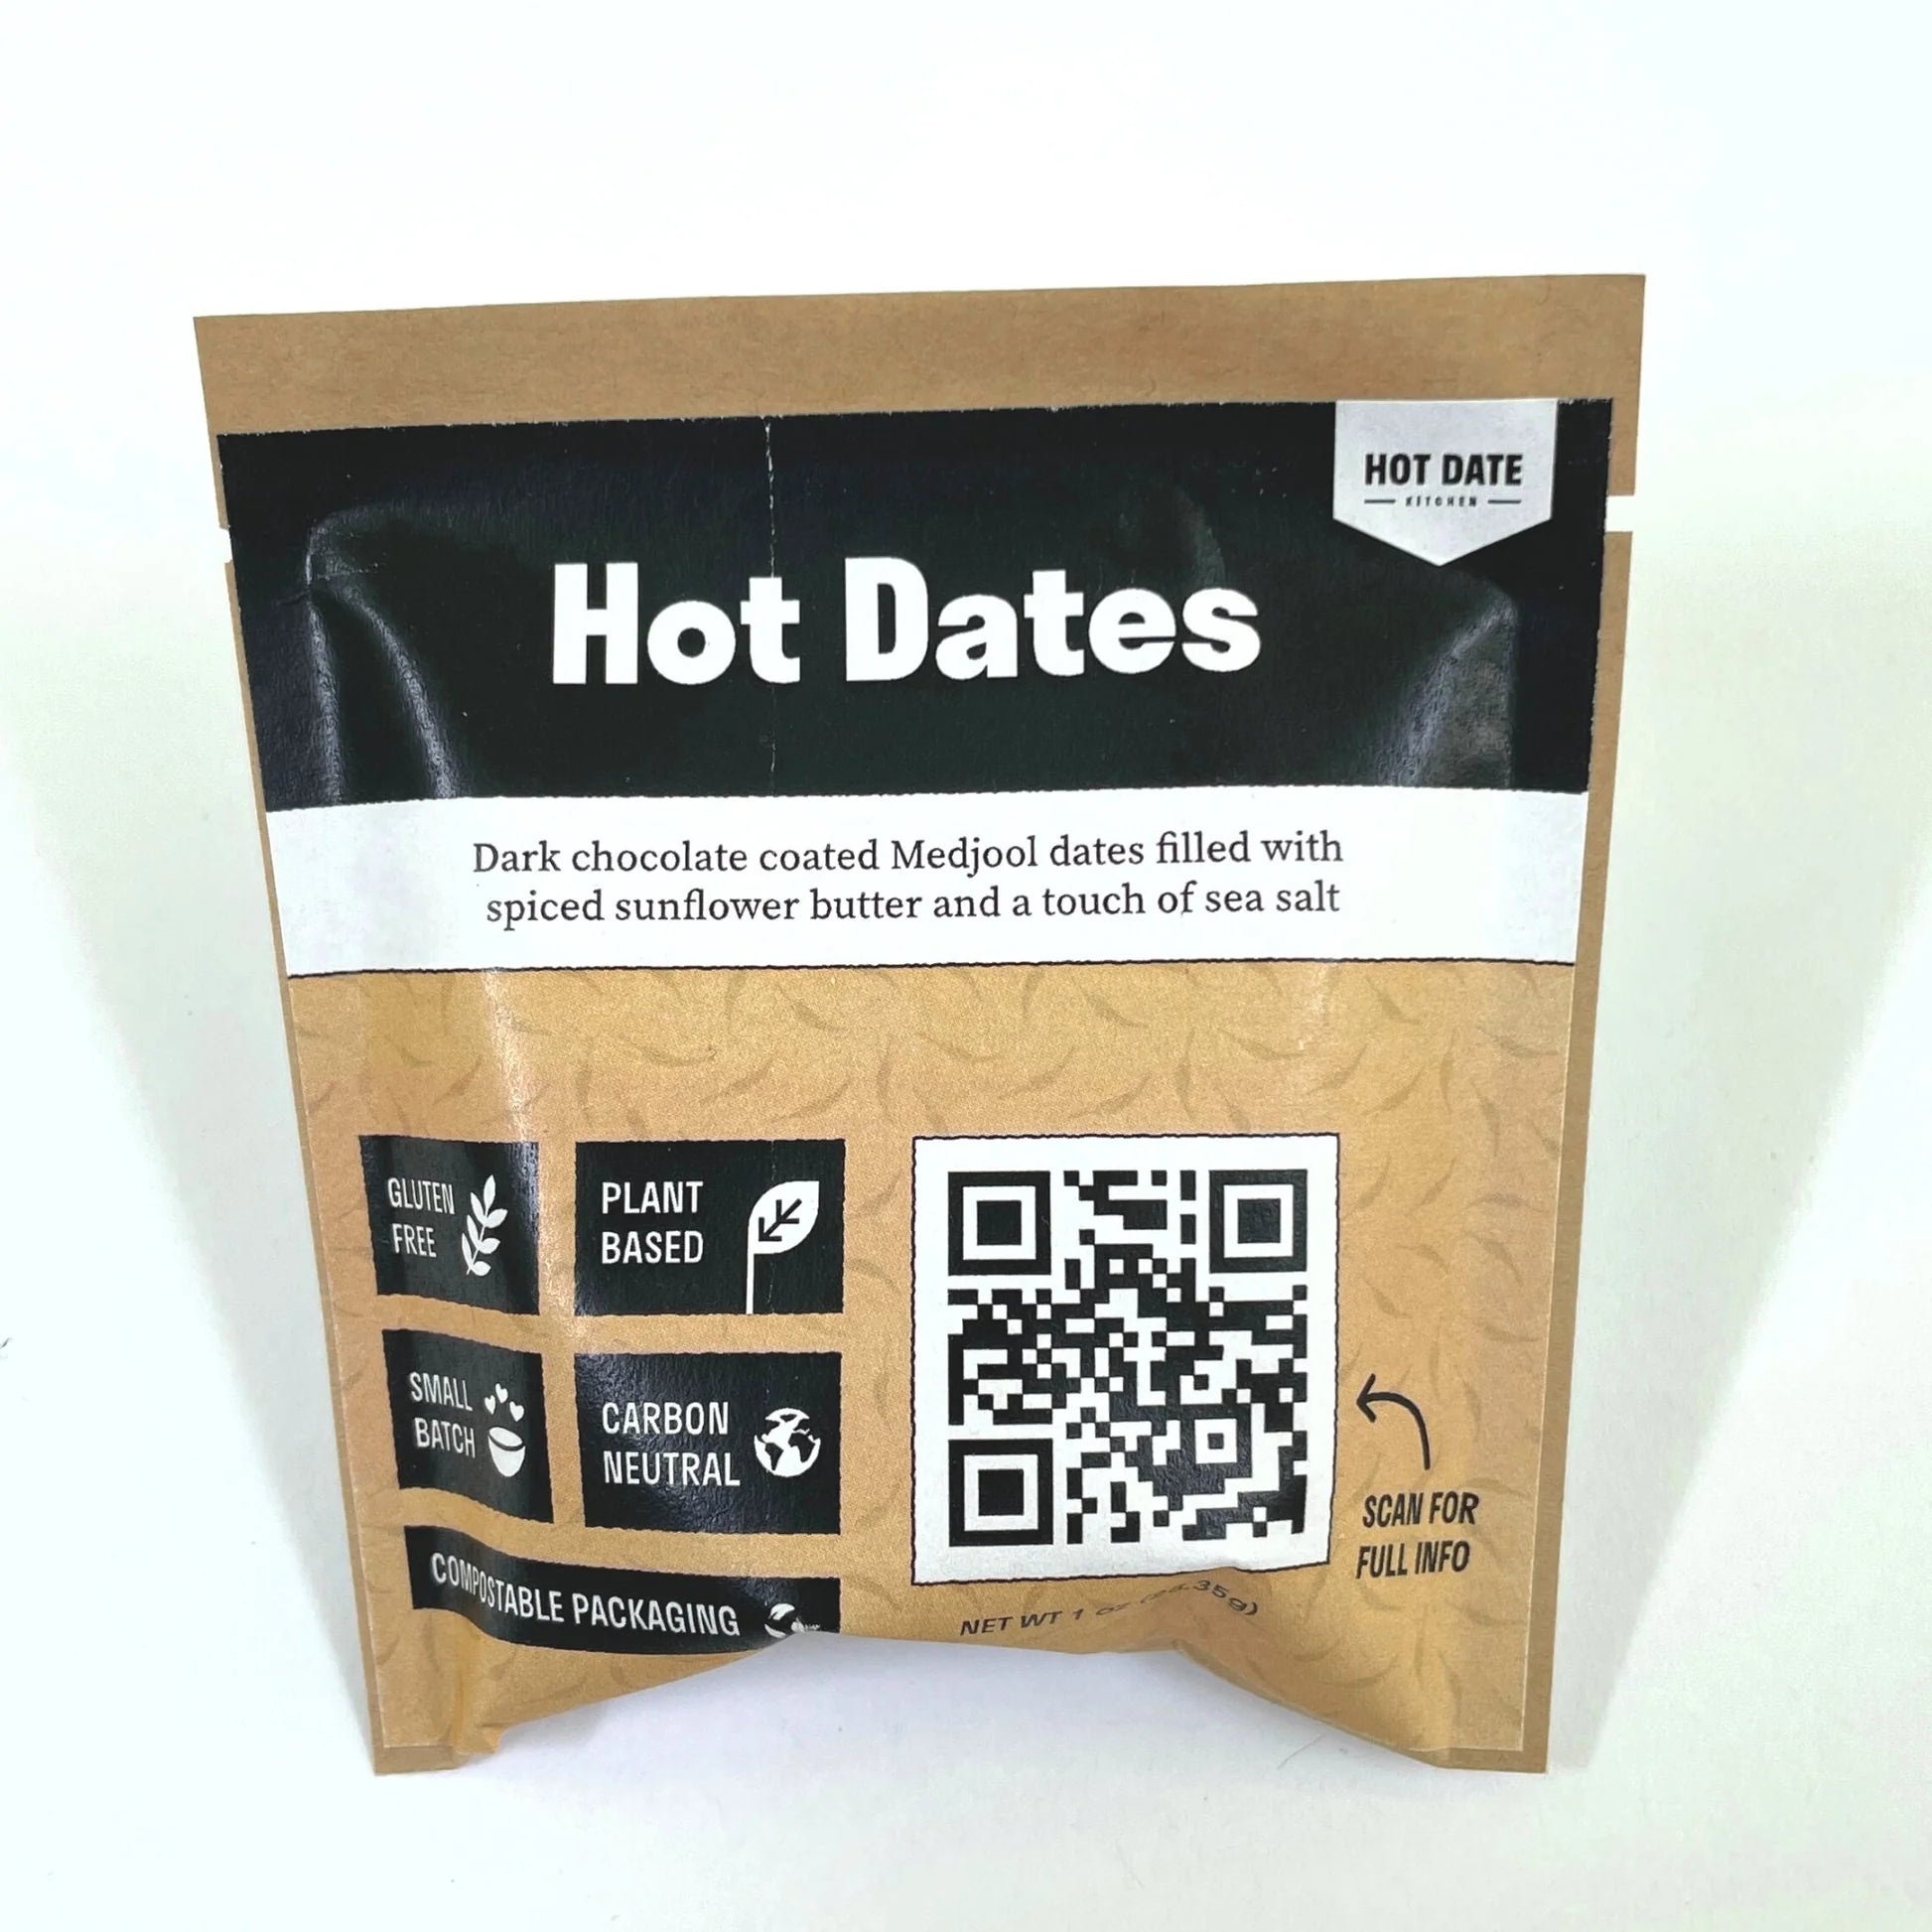 Brown hot dates bag with black and white text, scannable QR code, labels for gluten-free, plant-based, small-batch, eco-conscious